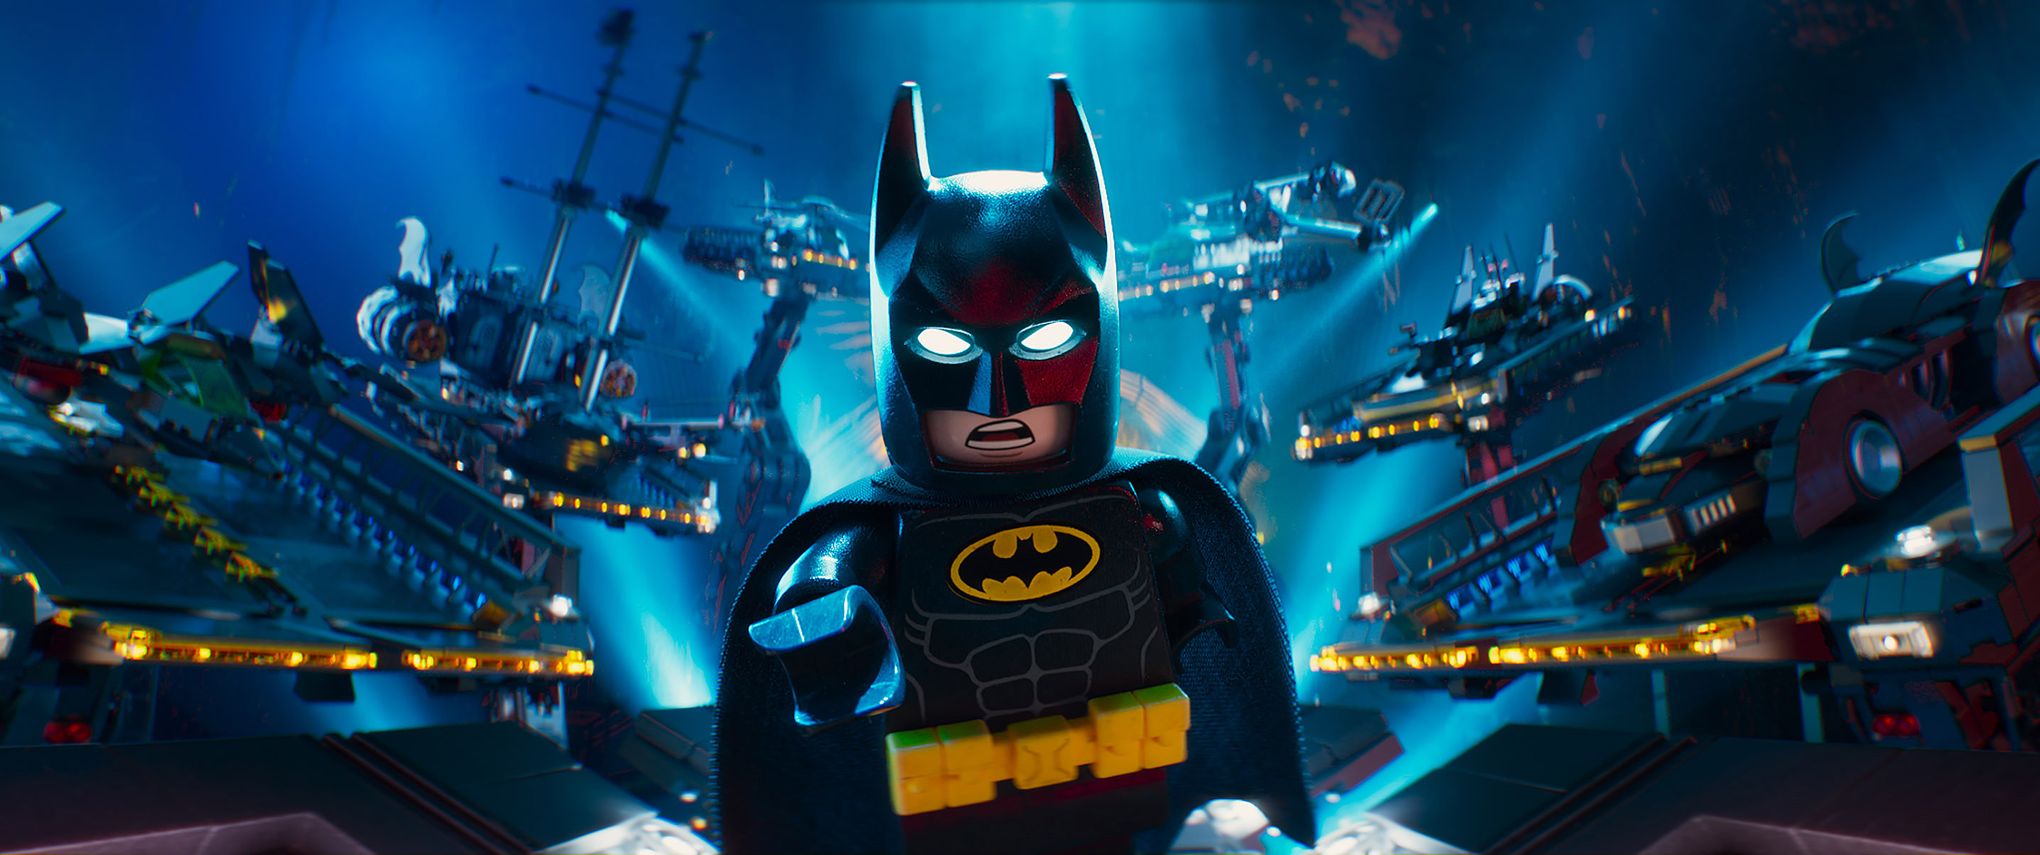 The Lego Batman Movie' review: Spinoff is pretty awesome